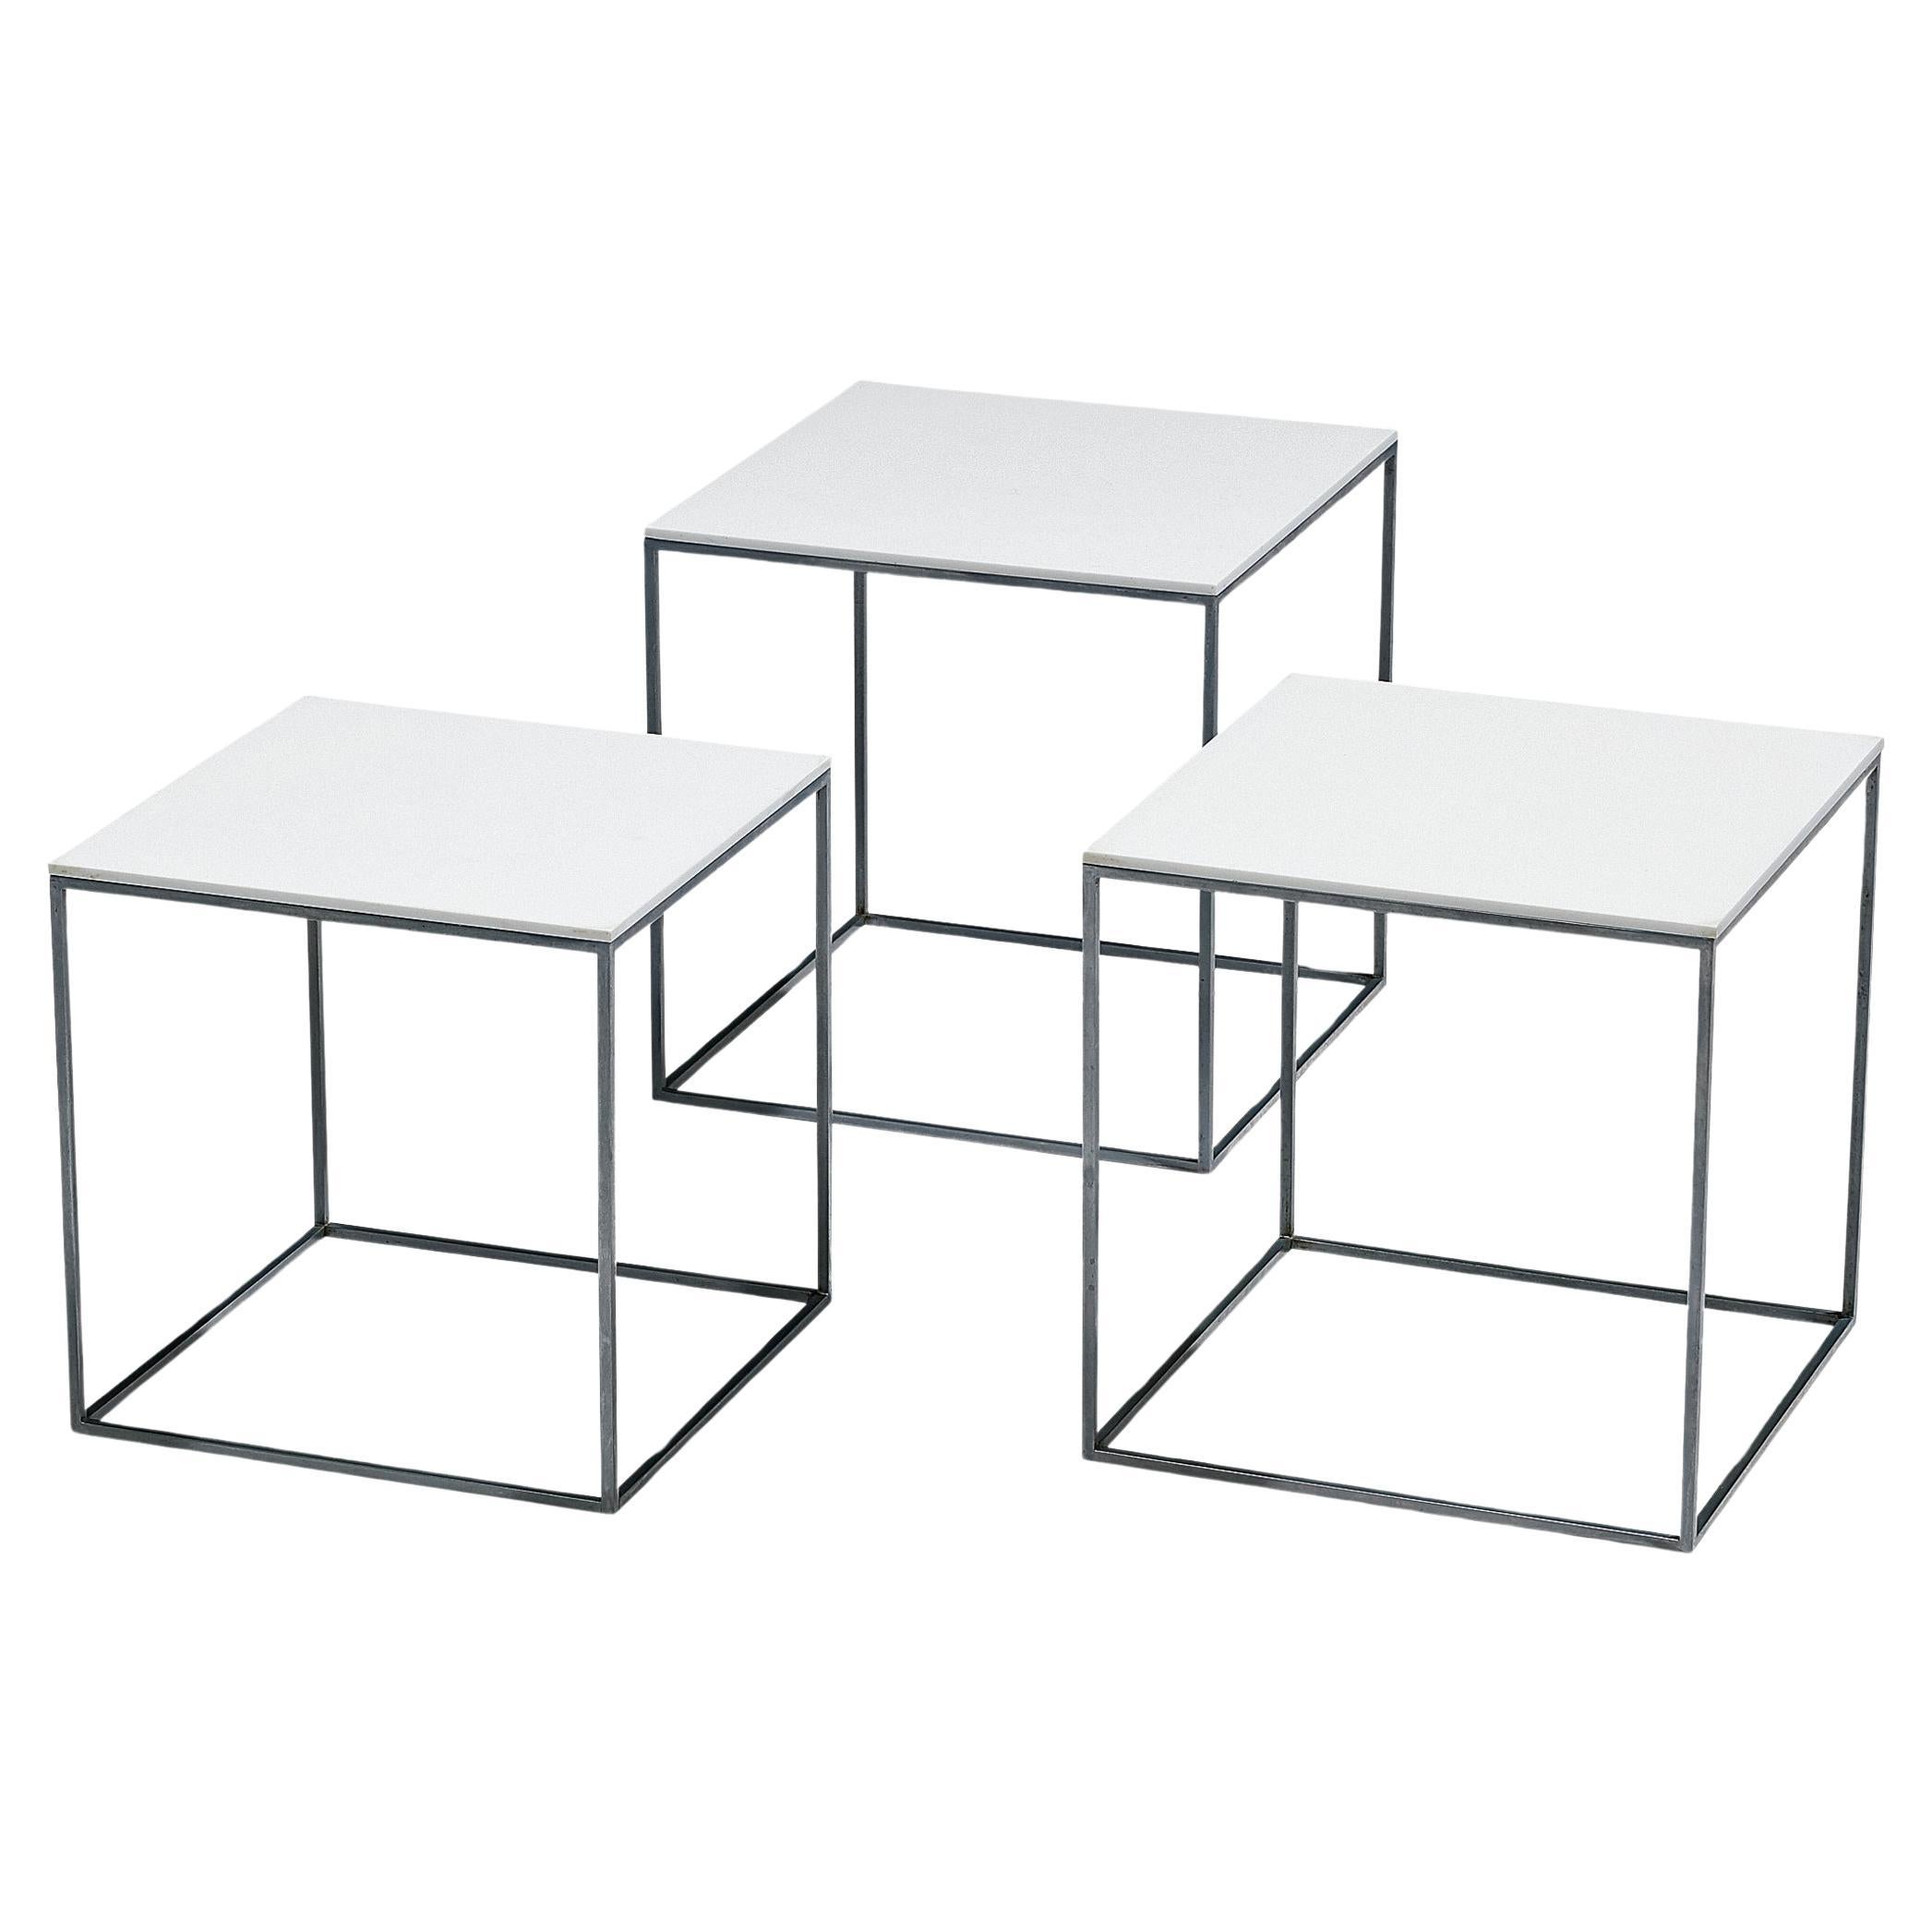 Poul Kjaerholm Set of Nesting Tables in White Perspex and Steel 